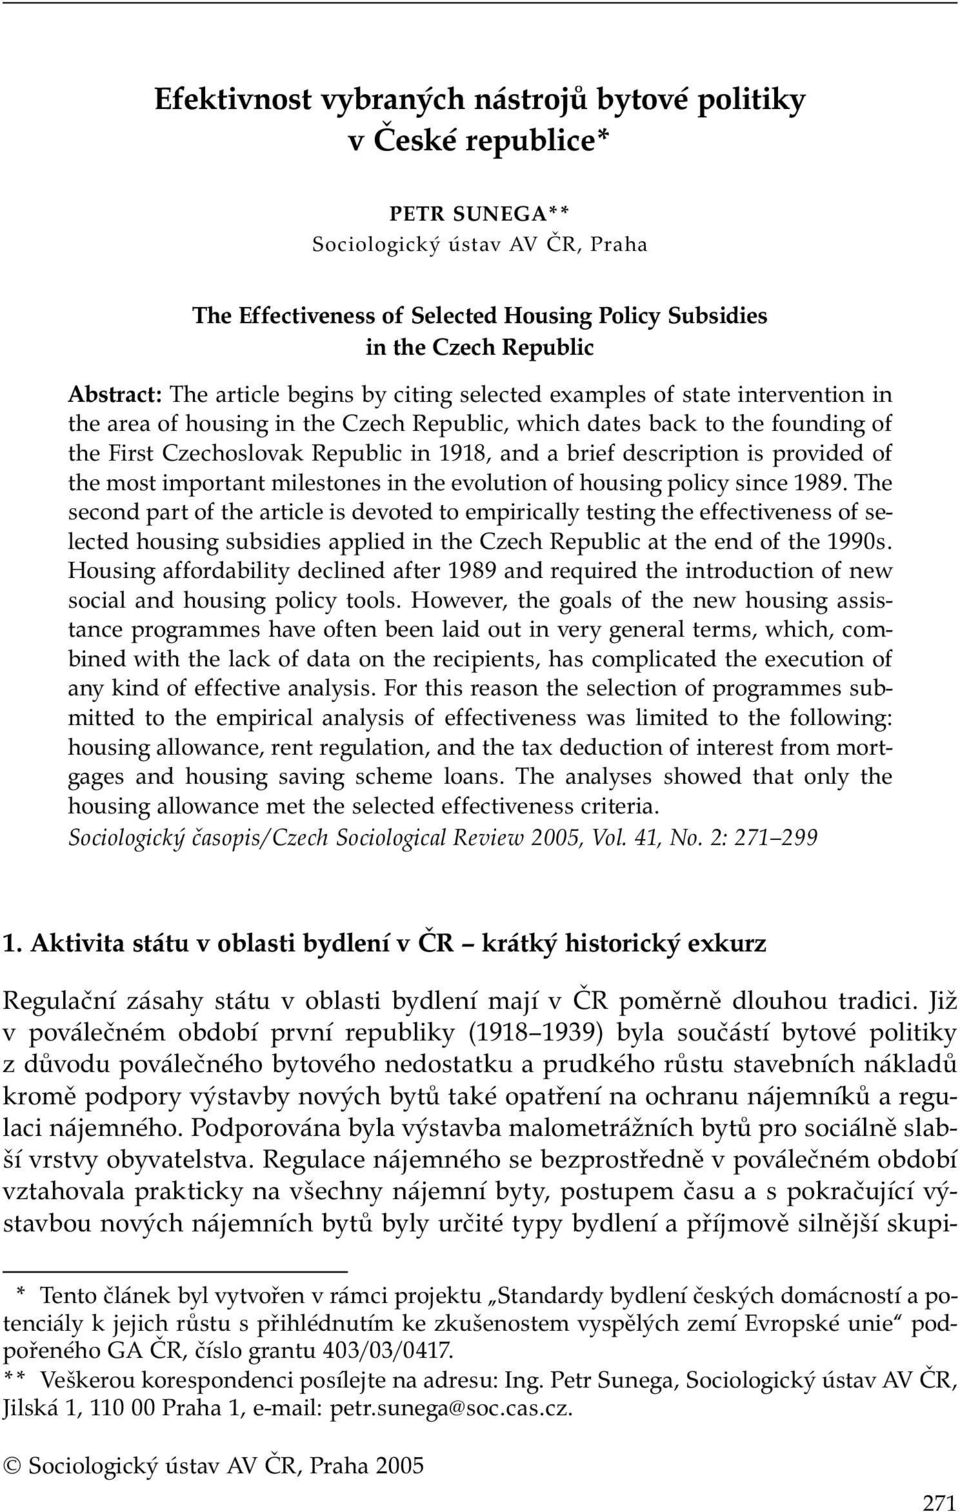 brief description is provided of the most important milestones in the evolution of housing policy since 1989.